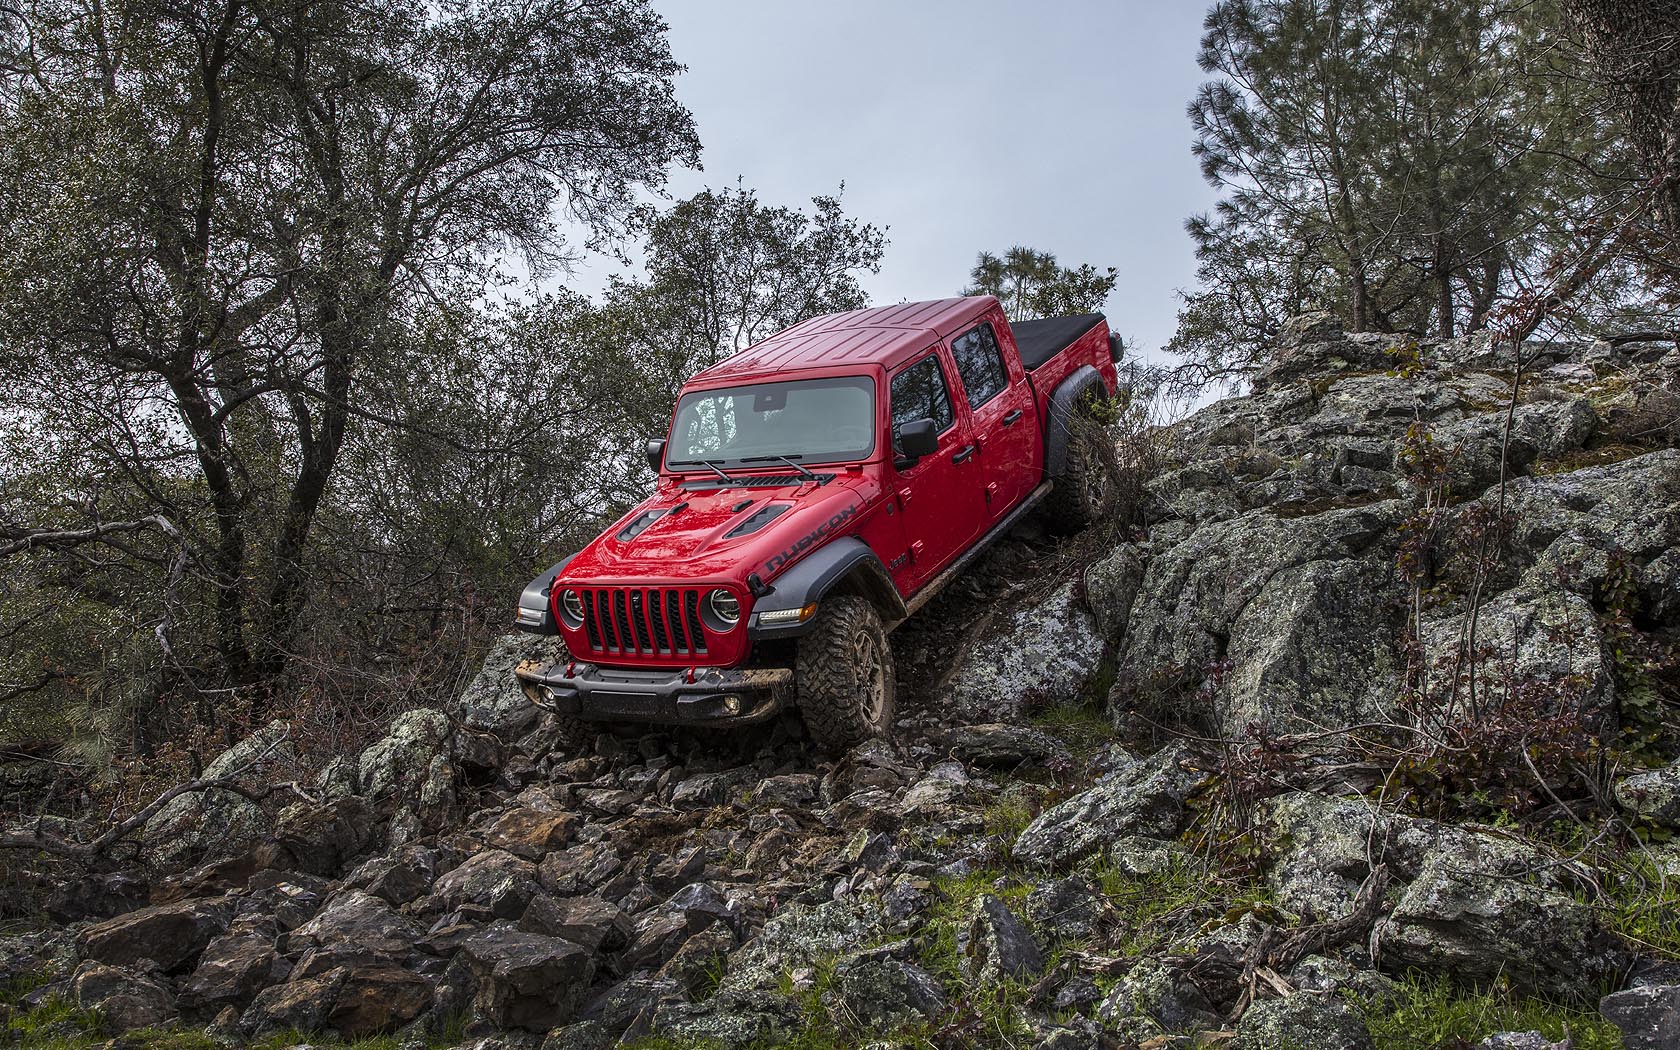 The Off Road Capabilities Of The 2021 Jeep Gladiator Rubicon